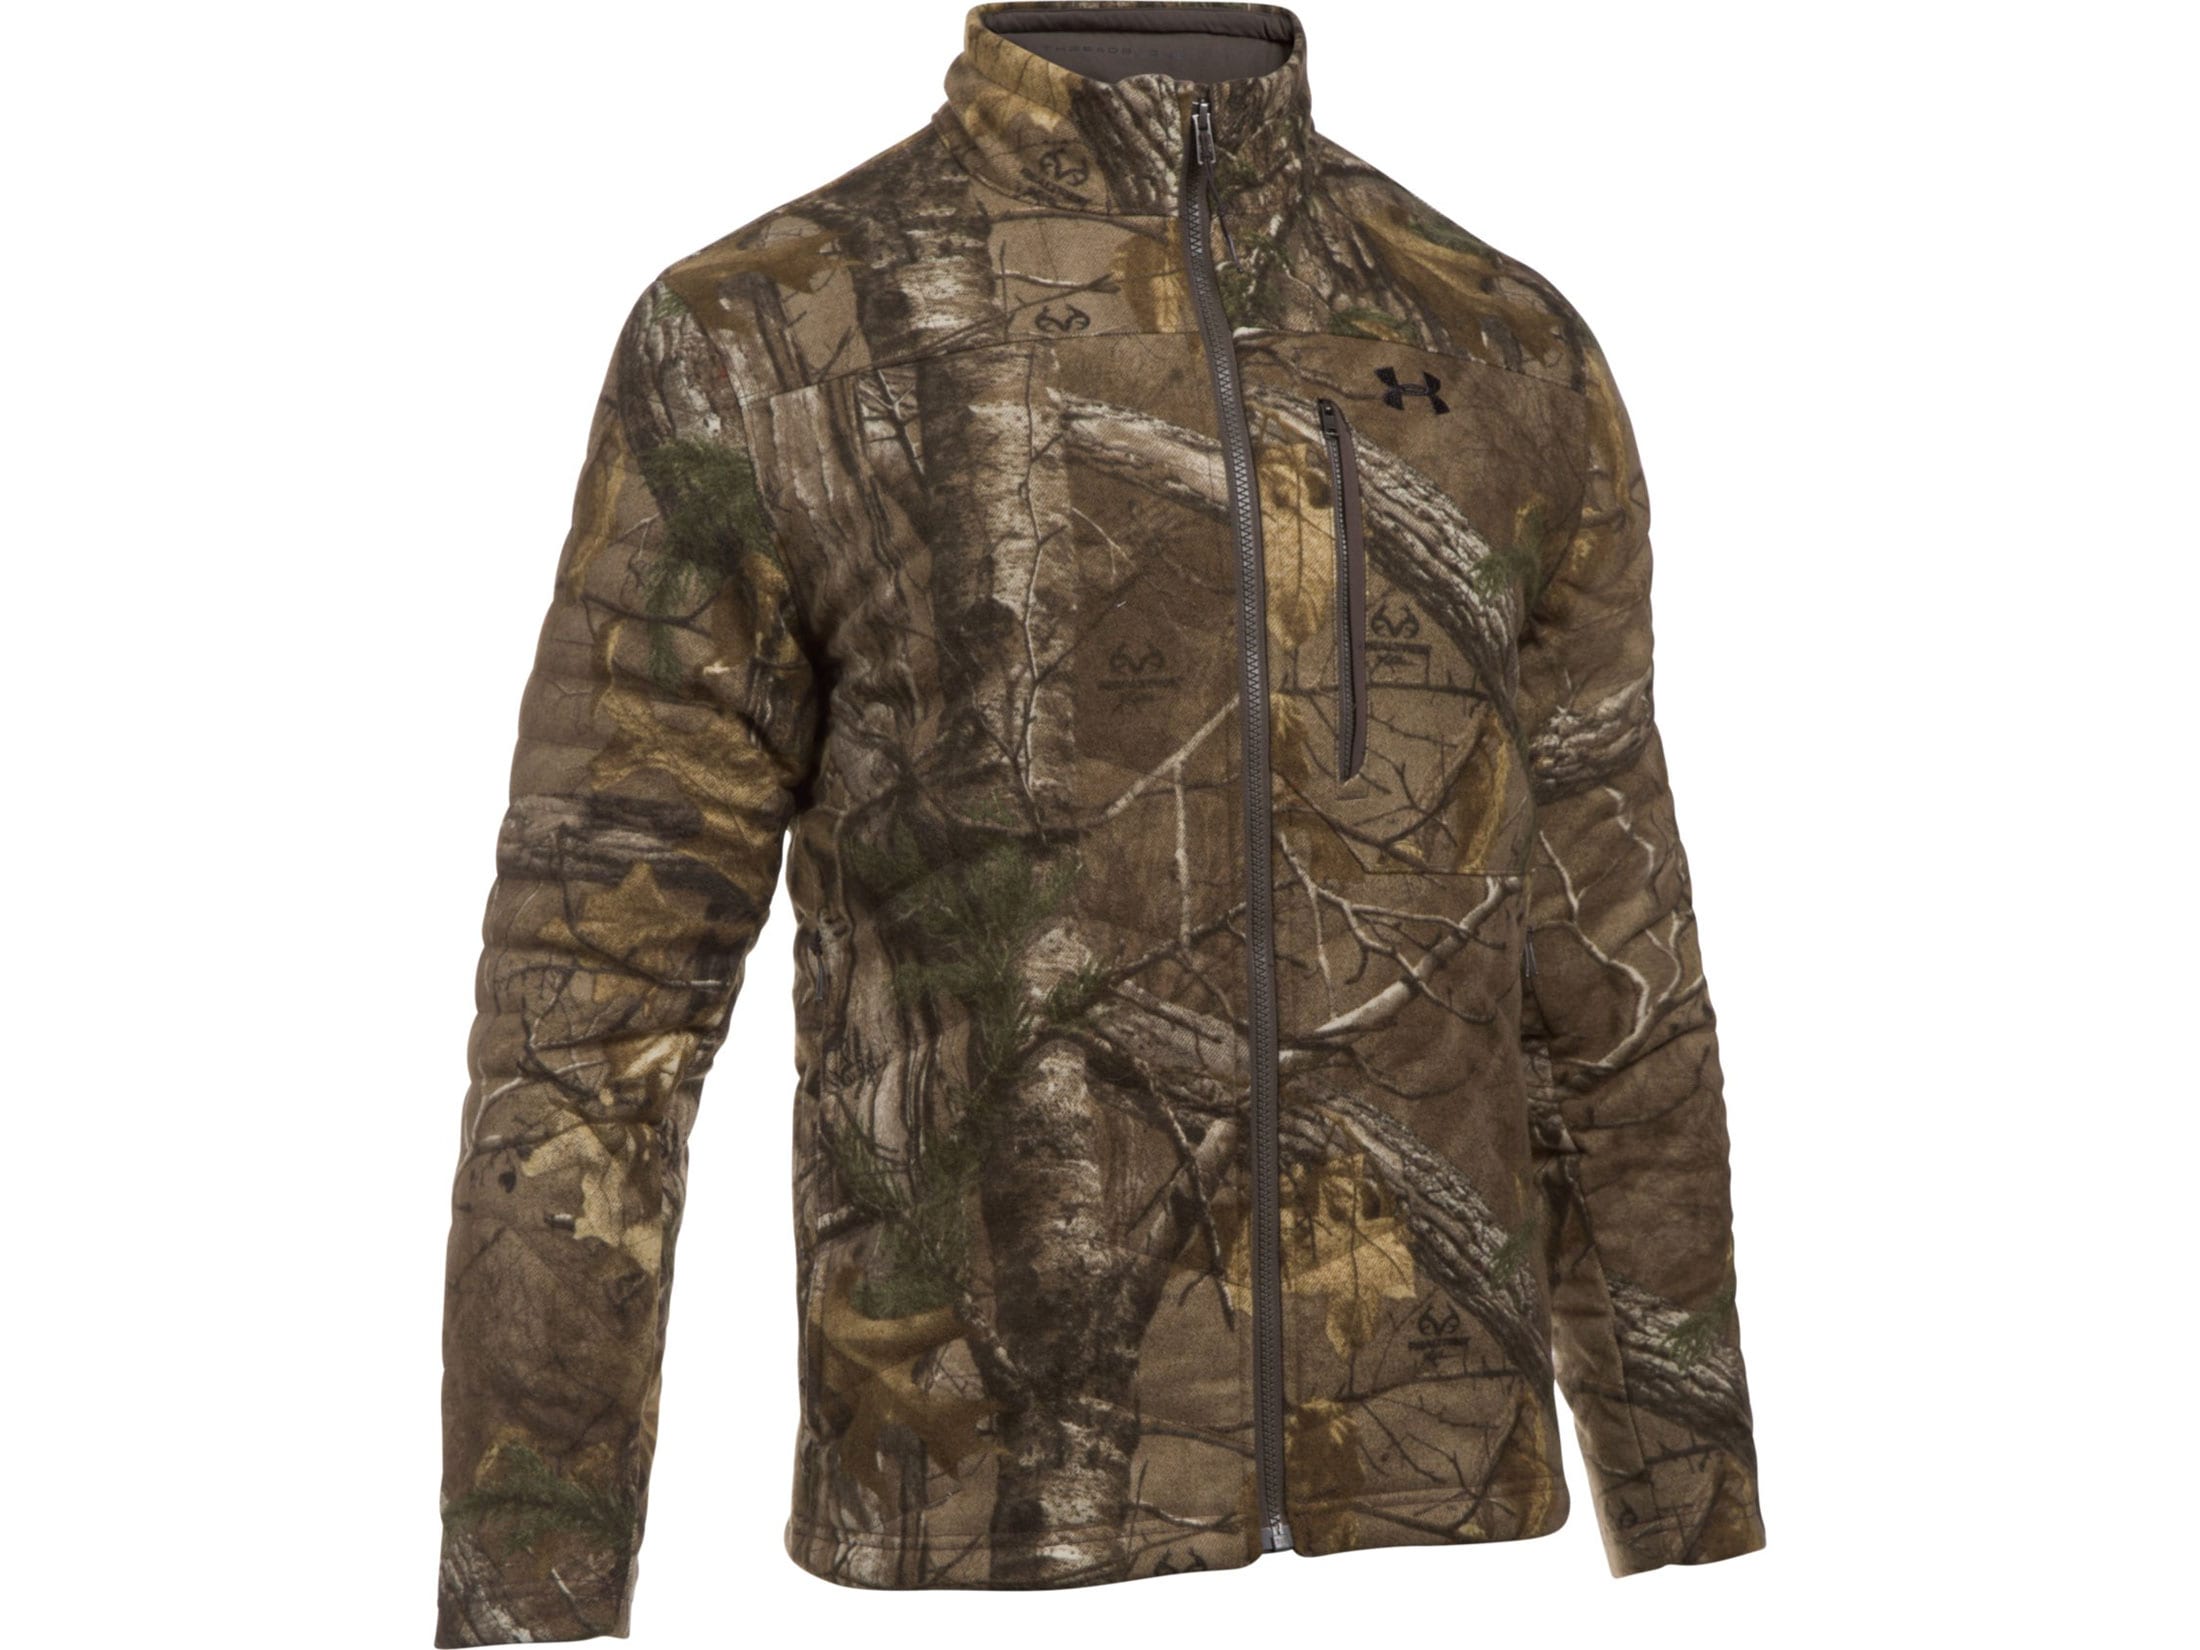 Under Armour Stealth Extreme Wool Hunting Jacket 1297437-946 Men’s Medium $300 